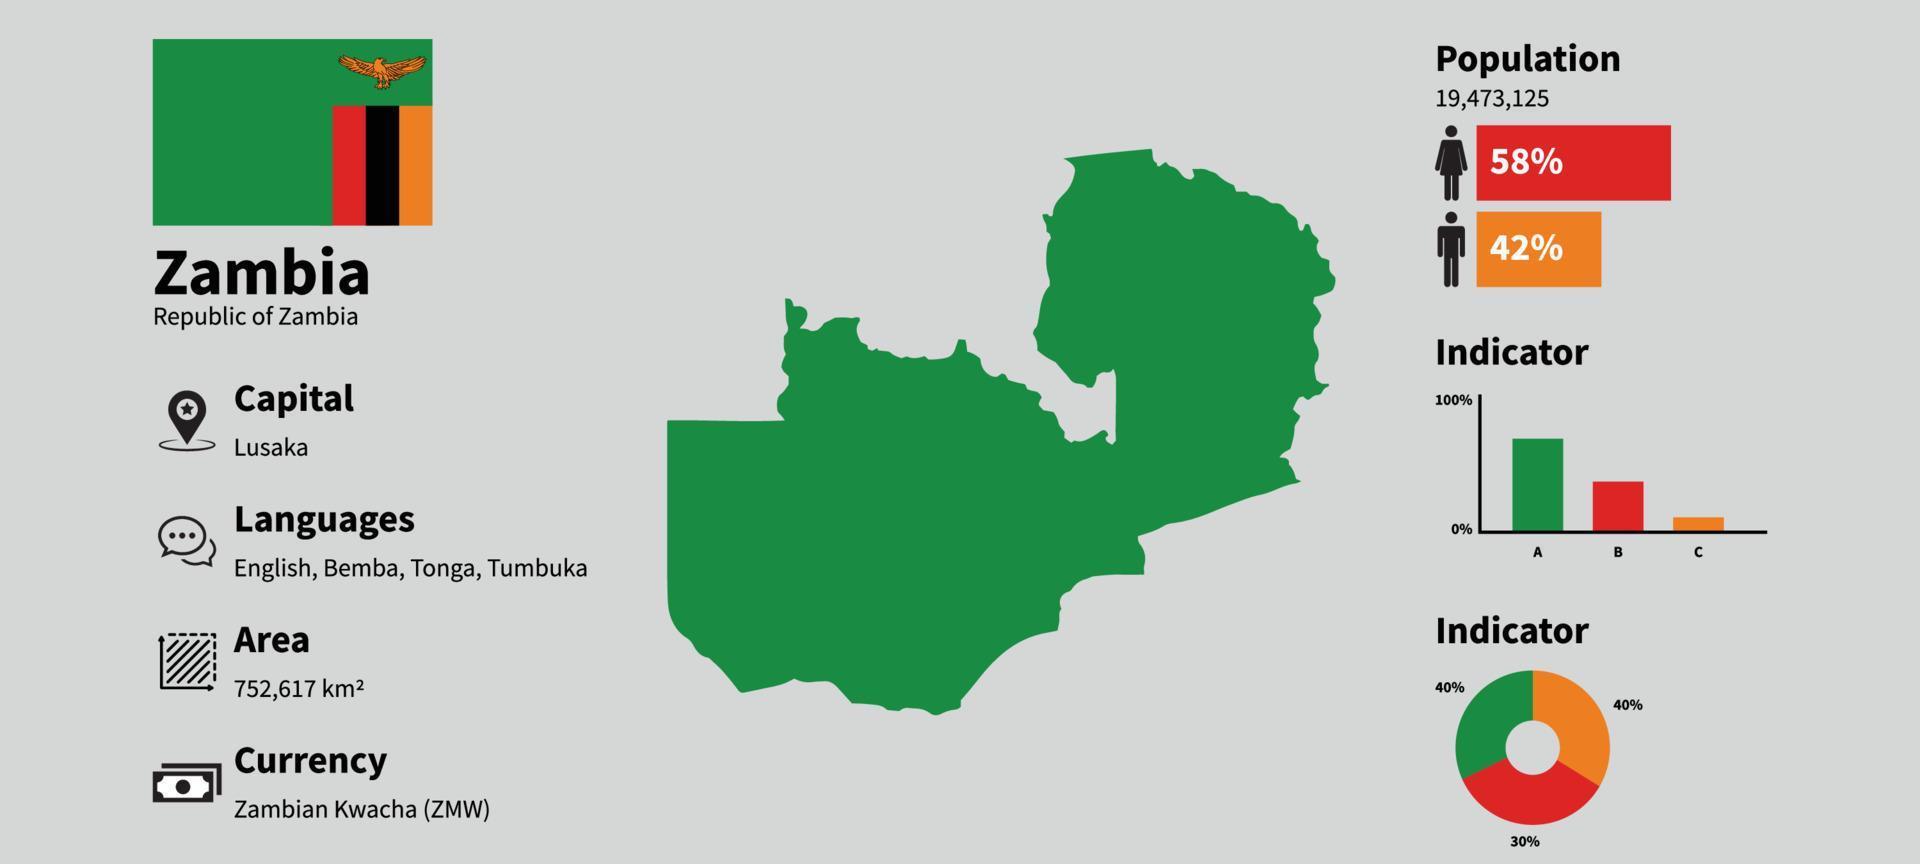 Zambia infographic vector illustration with accurate statistical data. Zambia country information map board and Zambia flag